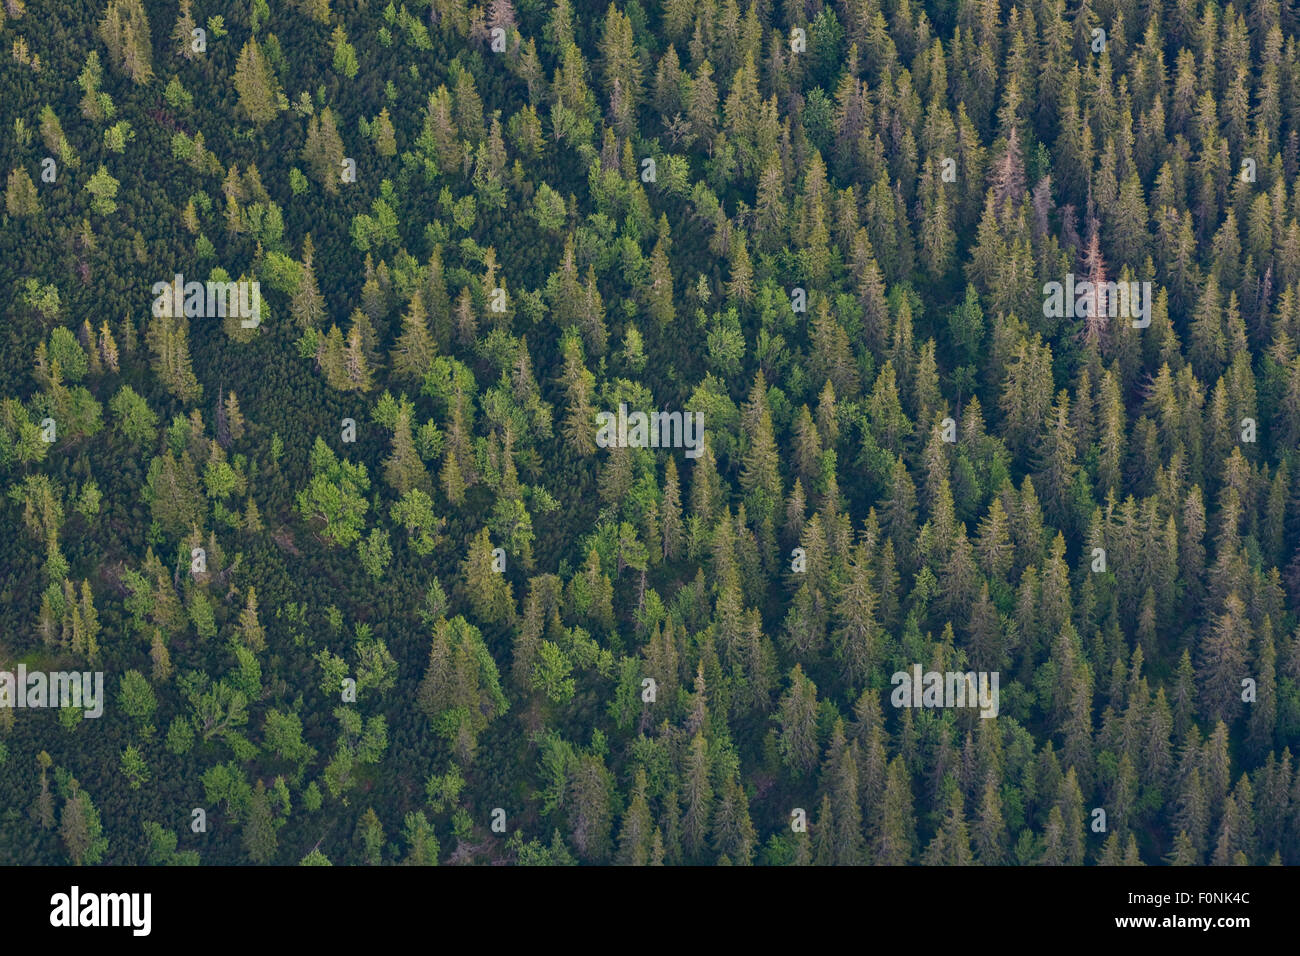 Aerial view the transition from mountain forest with Norway spruce (Picea abies) and Mountain ash / Rowan (Sorbus aucuparia) trees and the Dwarf mountain pine (Pinus mugo) zone, Western Tatras, Carpathian Mountains, Slovakia, June 2009 Stock Photo